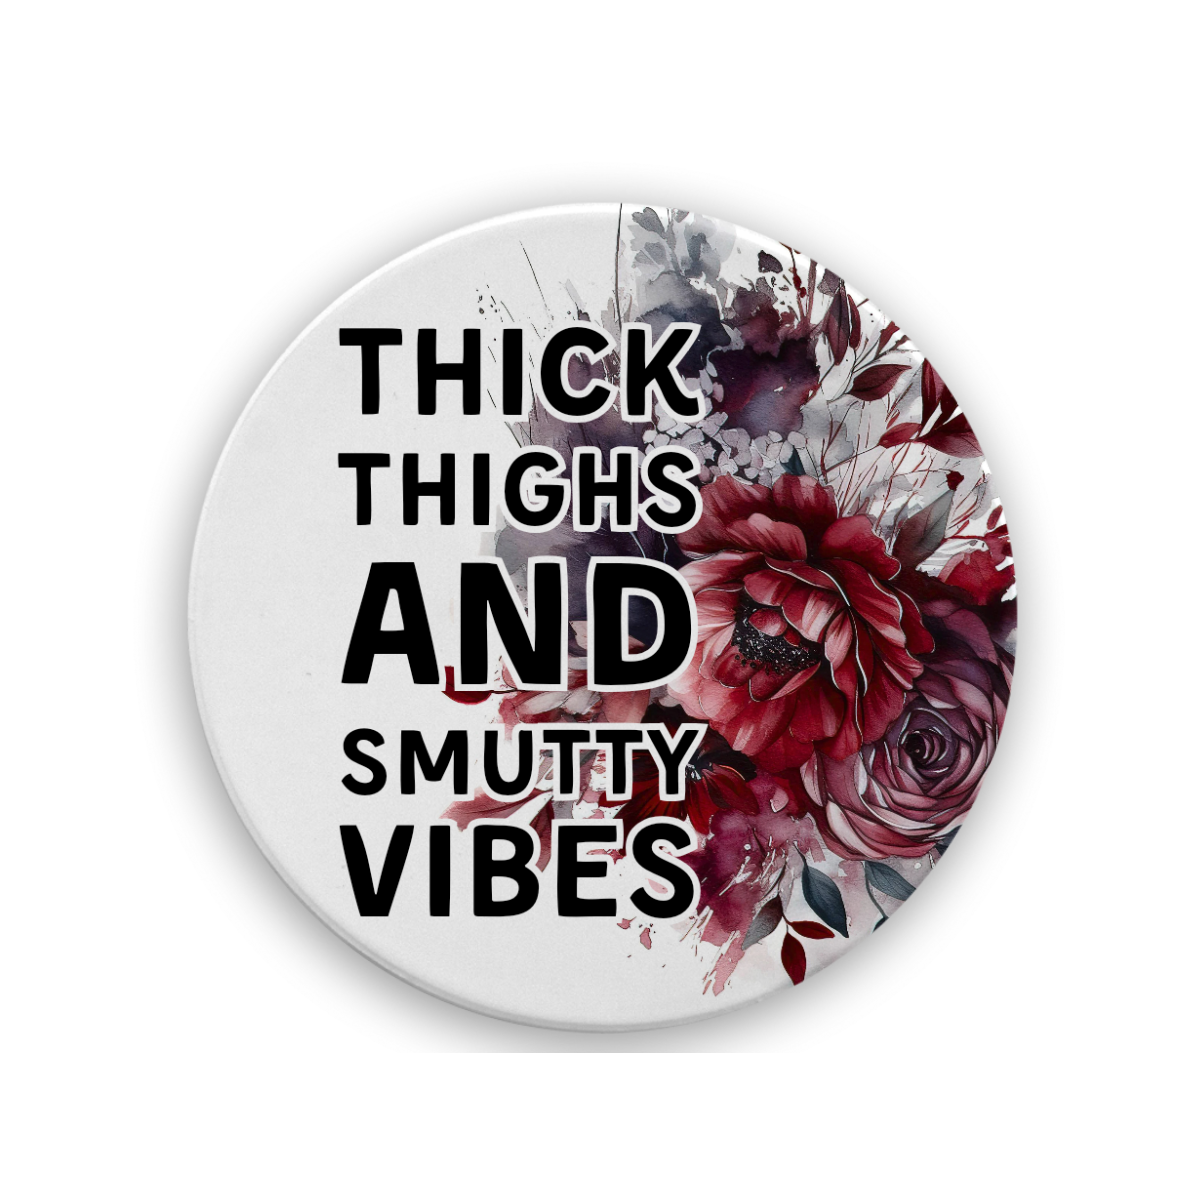 Thick Thighs And Smutty Vibes | Drink Coaster - The Pretty Things.ca